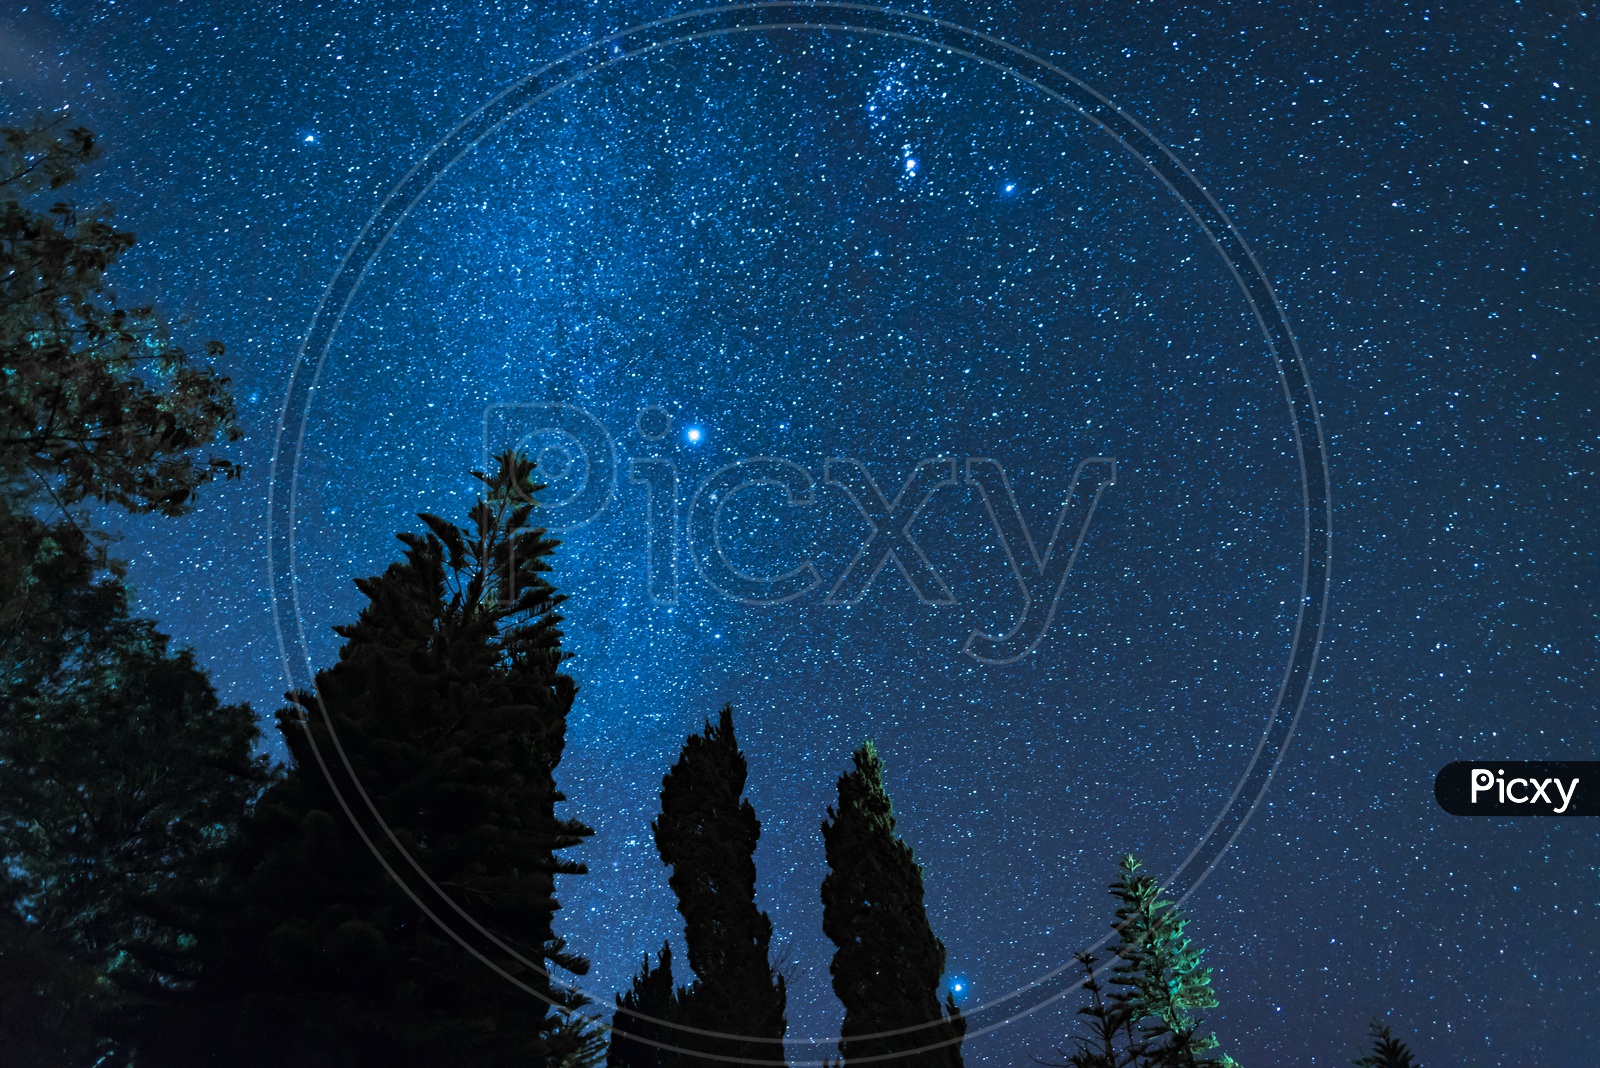 Silhouette Of Pine Trees over Star Gazing Of Milkyway Galaxy